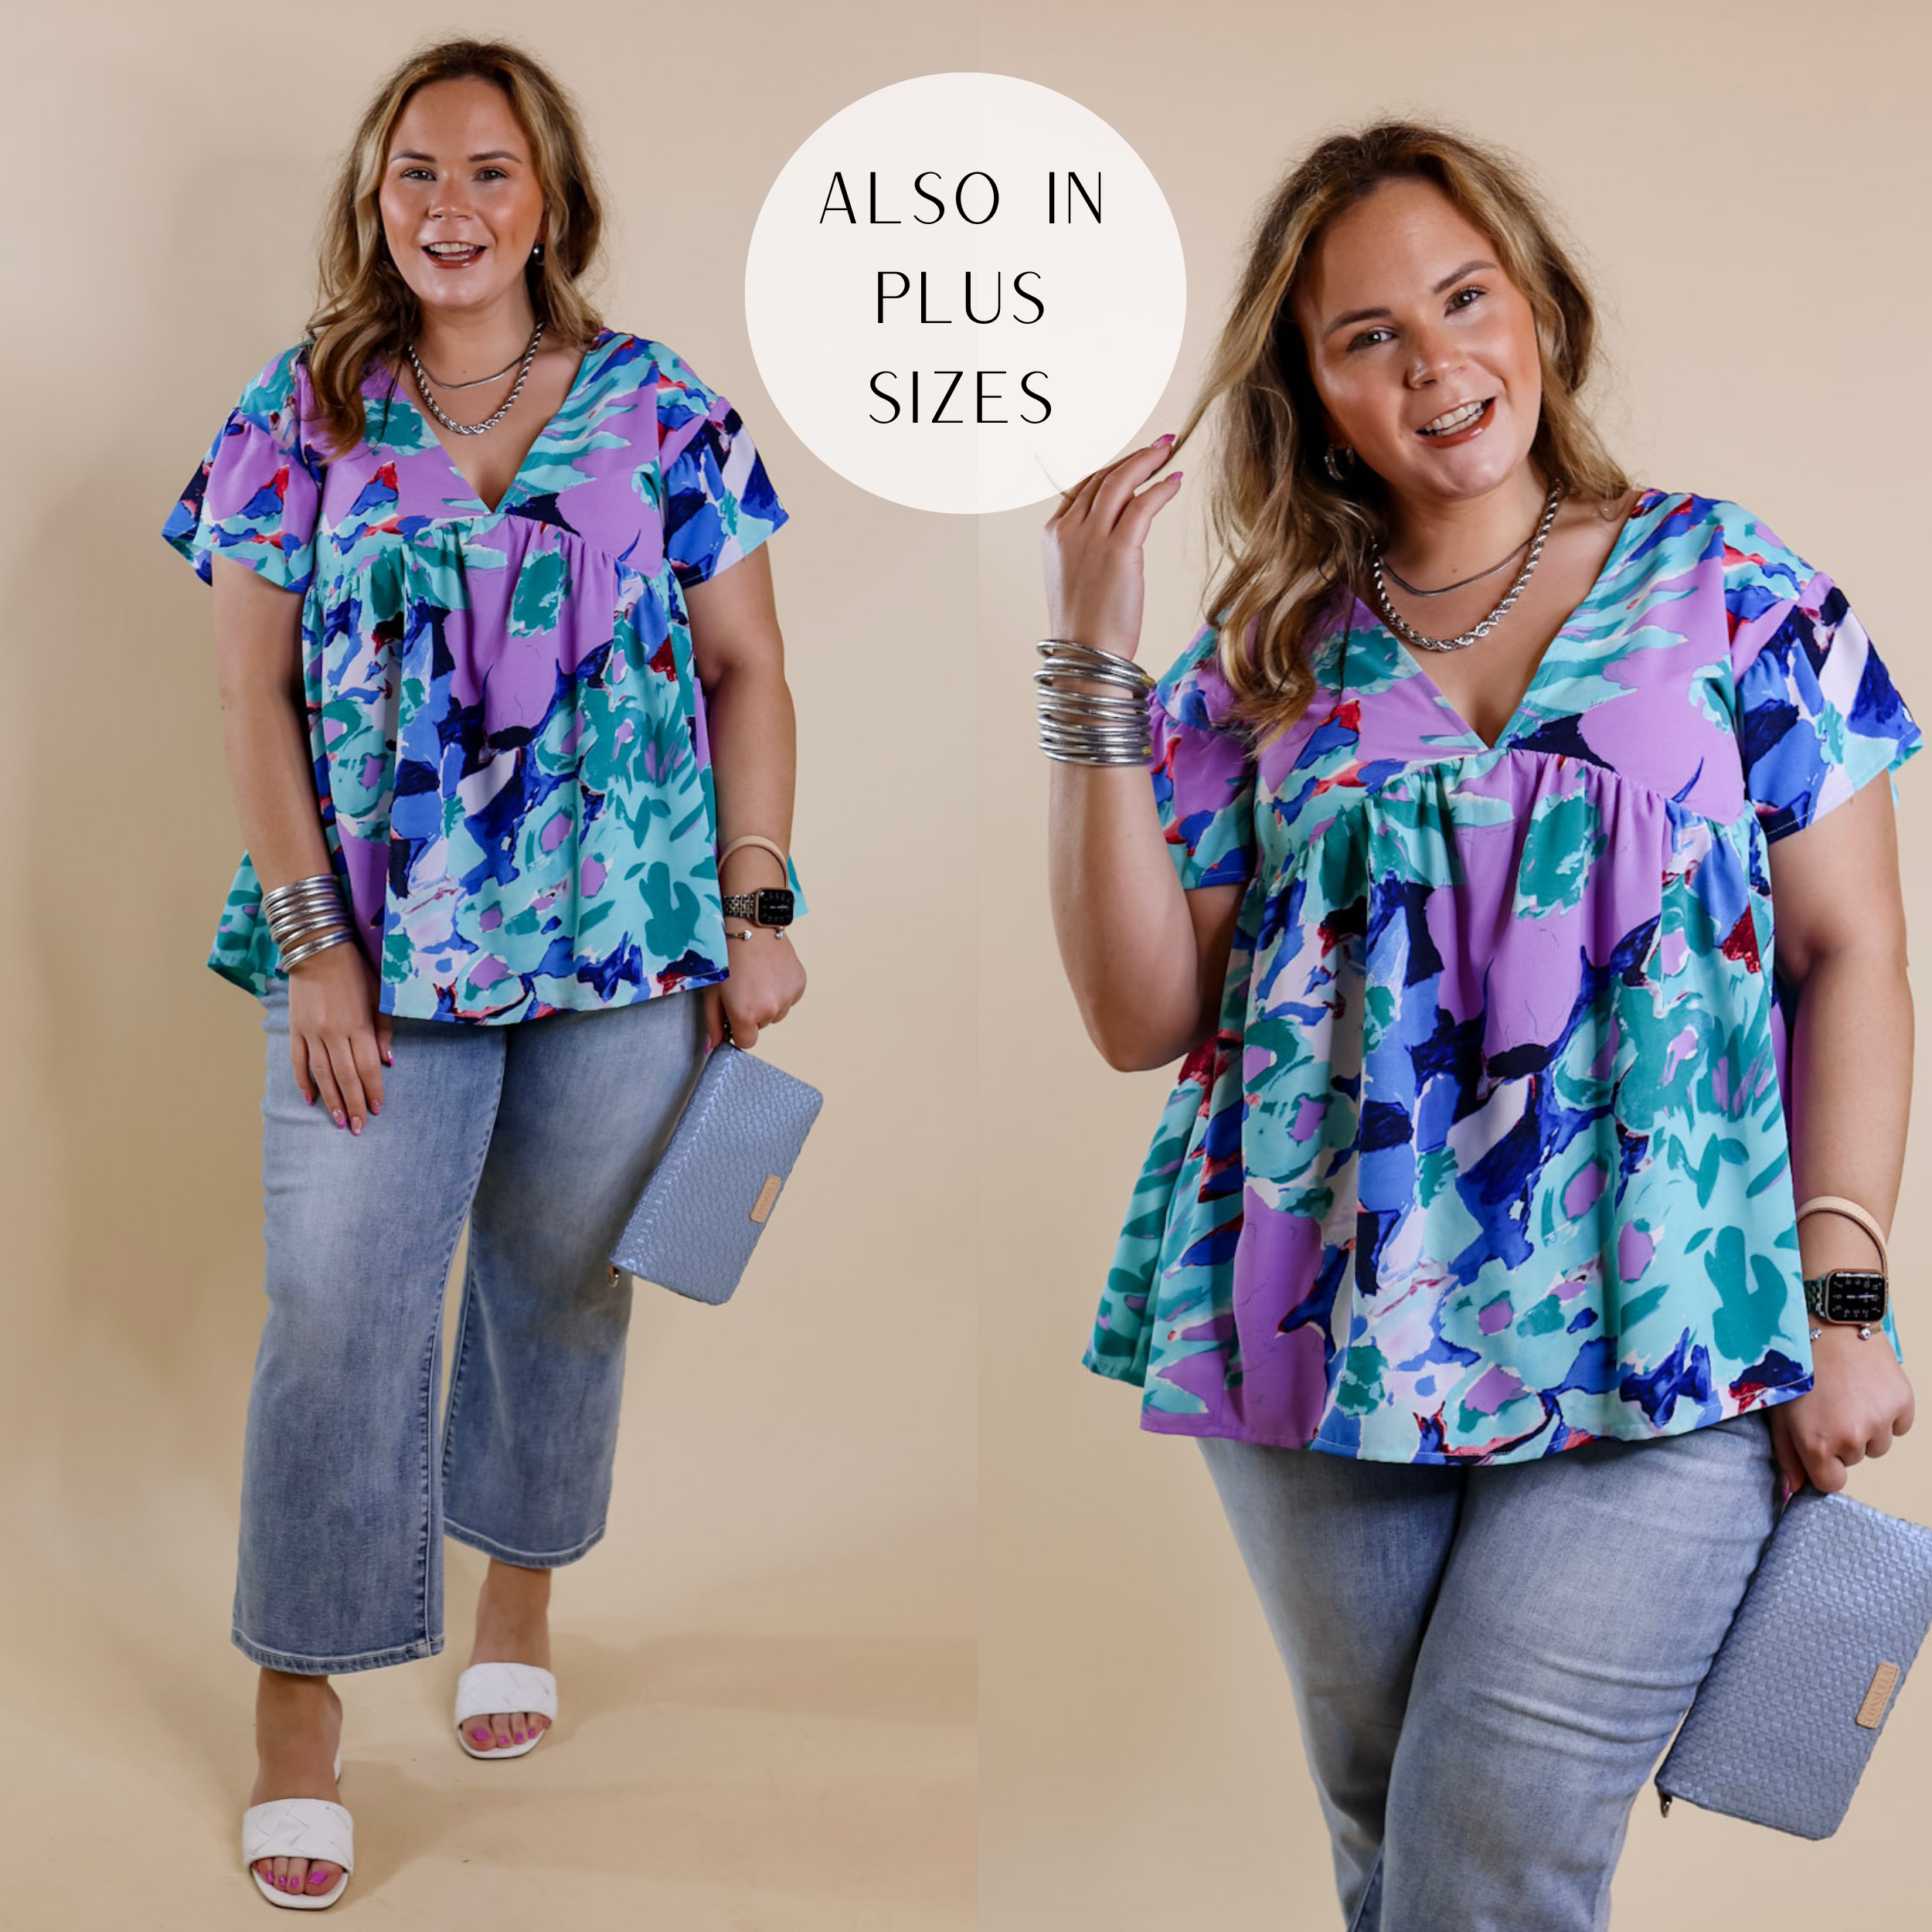 Model is wearing a blue and purple floral top with a deep v neckline and short sleeves. Model has it paired with white sandals, cropped jeans, and silver jewelry.